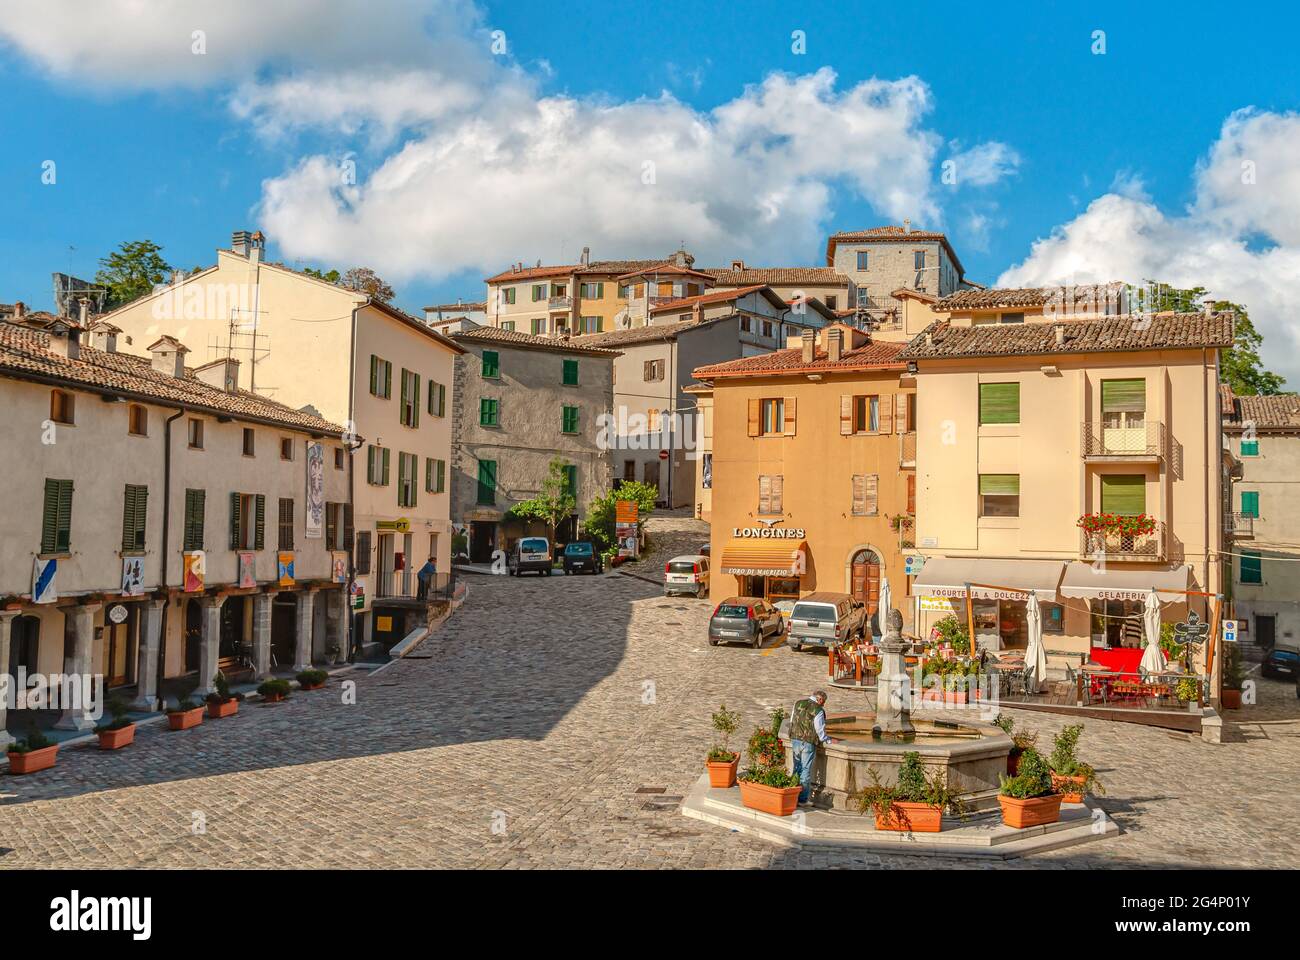 Piazza at the historical town centre of Pennabilli in Emilia Romagna, North Italy. Stock Photo